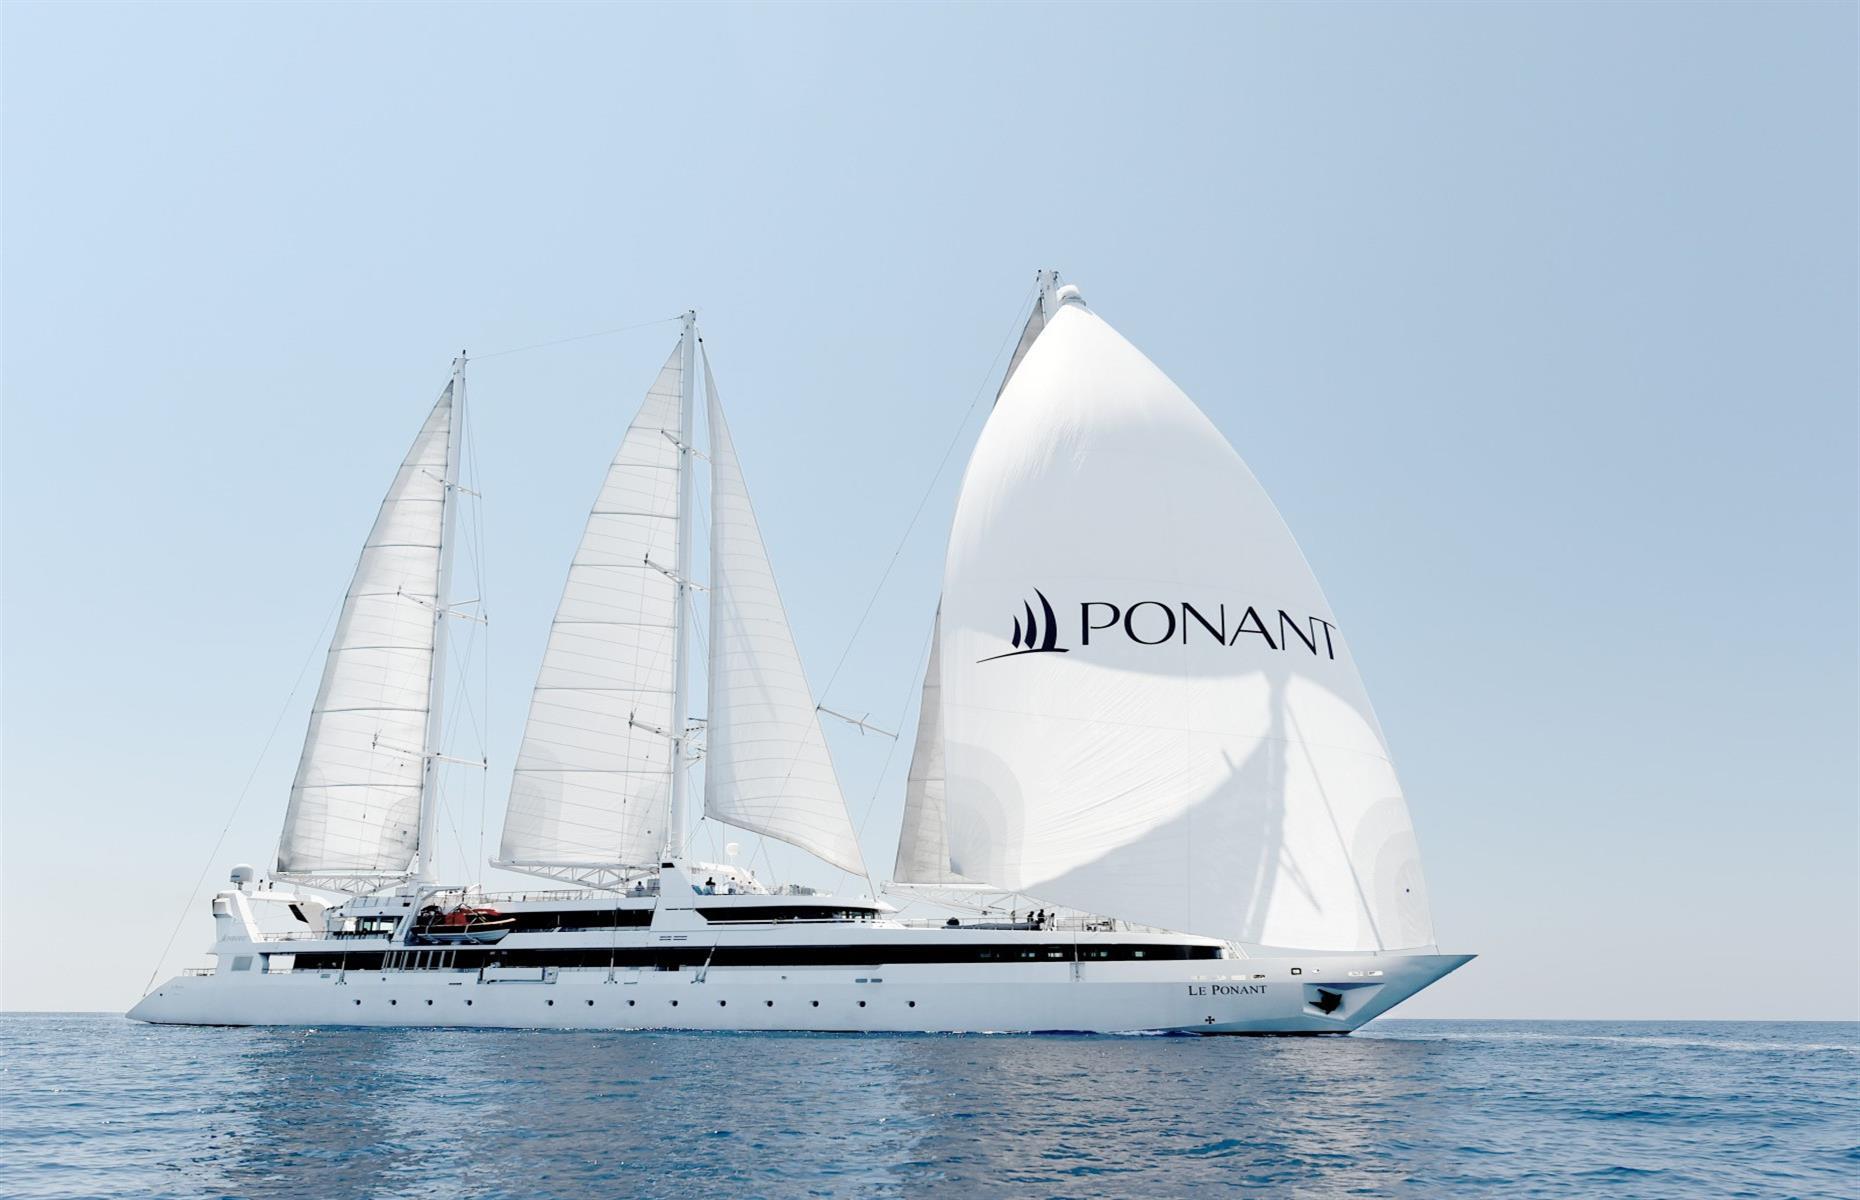 <p><a href="https://uk.ponant.com/le-ponant">Le Ponant</a> is the flagship vessel of French cruise company Ponant. The three-mast cruise yacht, scheduled for relaunch in June 2022, has undergone a complete refit and refurbishment. Designed by French studio Jean-Philippe Nuel, her common areas have refined, clean lines with an elegant finish. The color palette – consisting of off-white, taupe and caviar gray – reflects the classic, sophisticated style, with no need for embellishments or bling.</p>